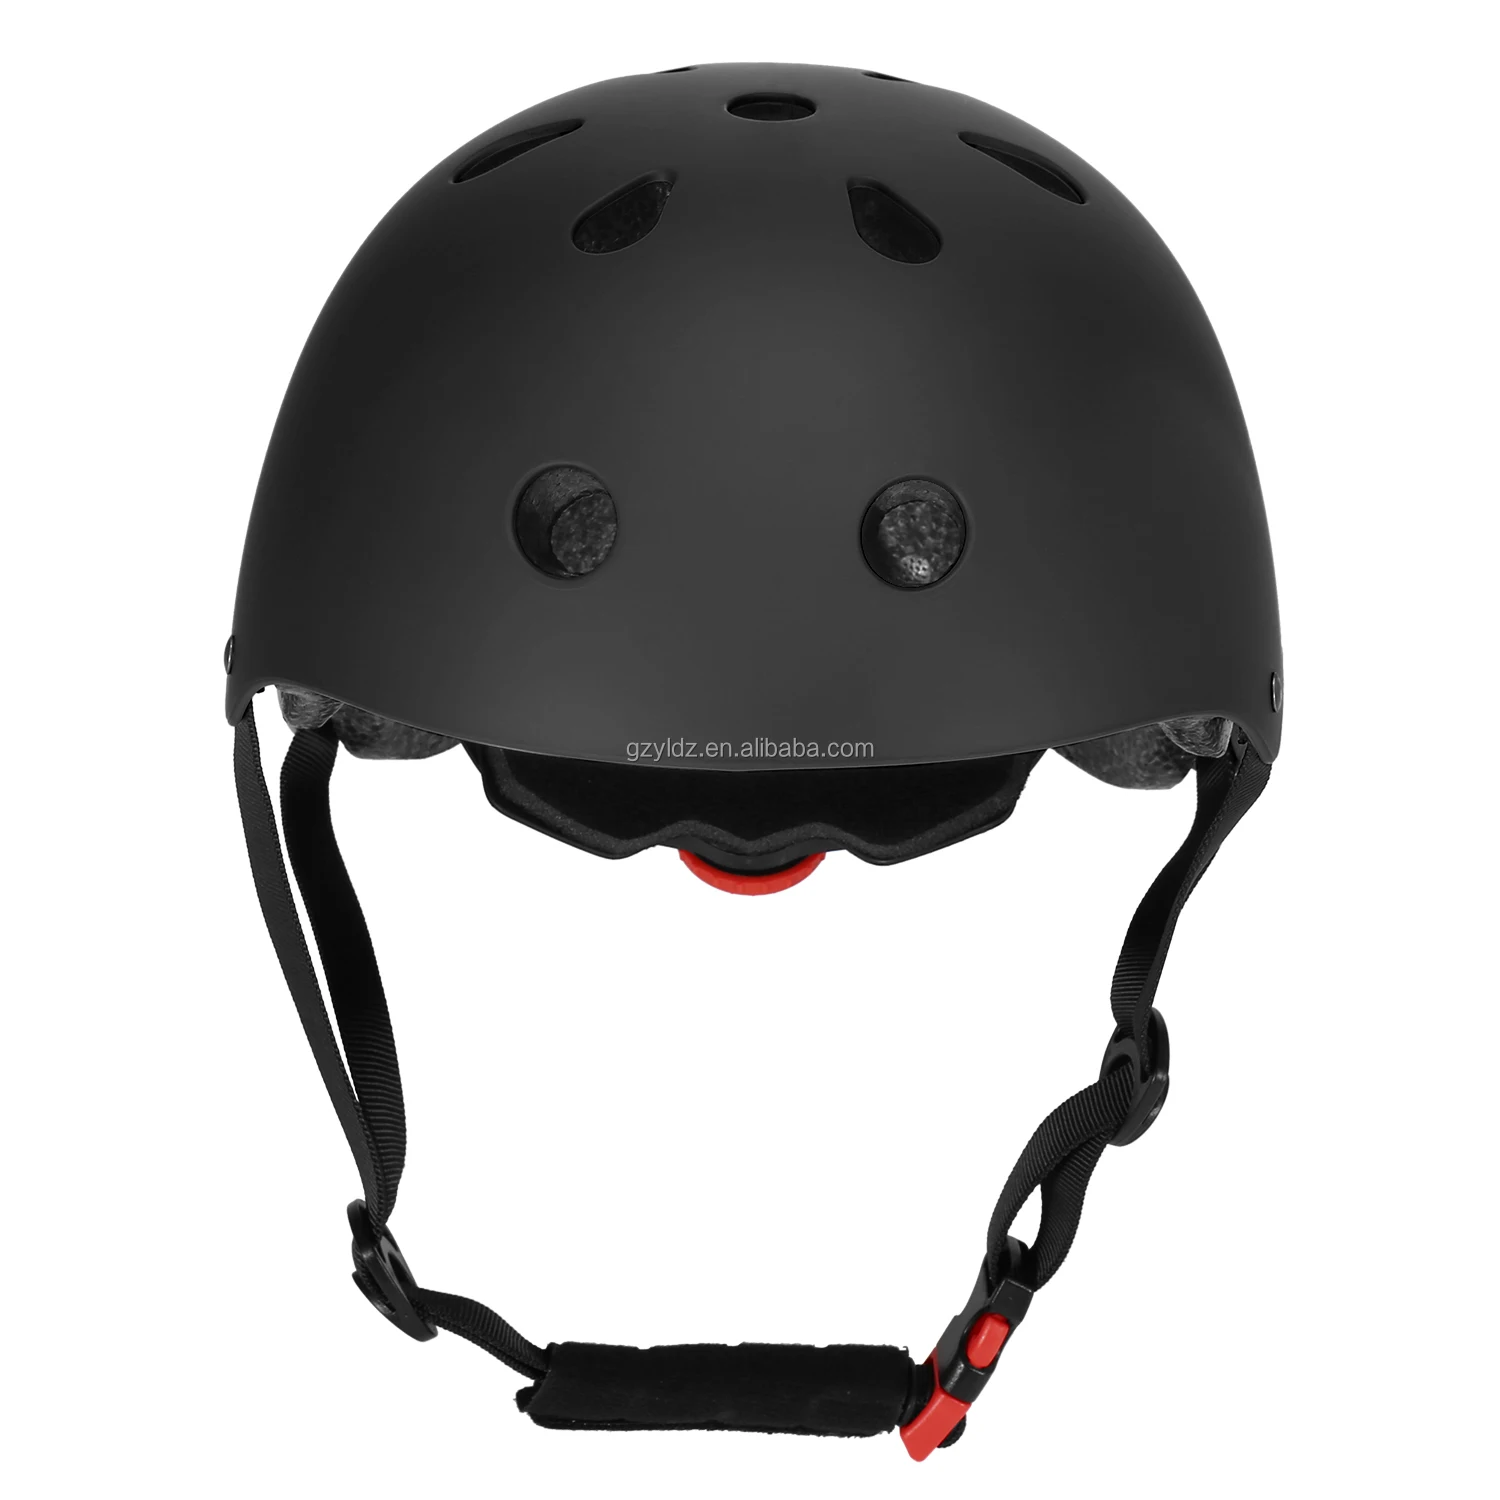 Details about   Adult Children Outdoor Impact Resistance Ventilation Helmet For Cycling Rock Cli 